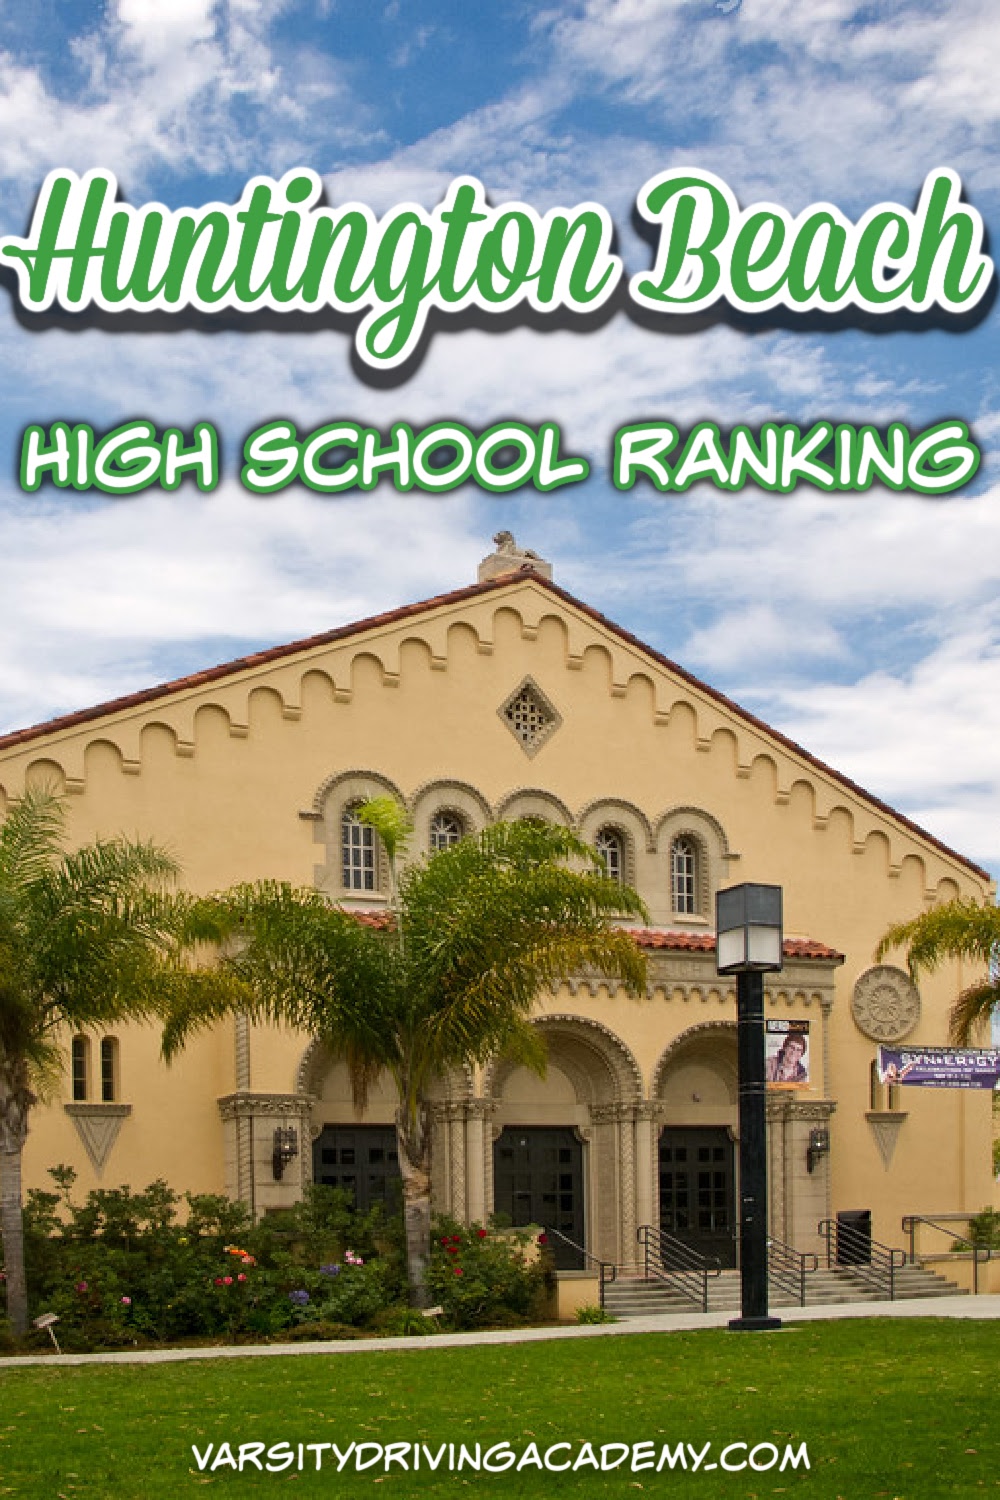 The Huntington Beach High School ranking makes it easier for parents and students to determine if this high school is right for them.